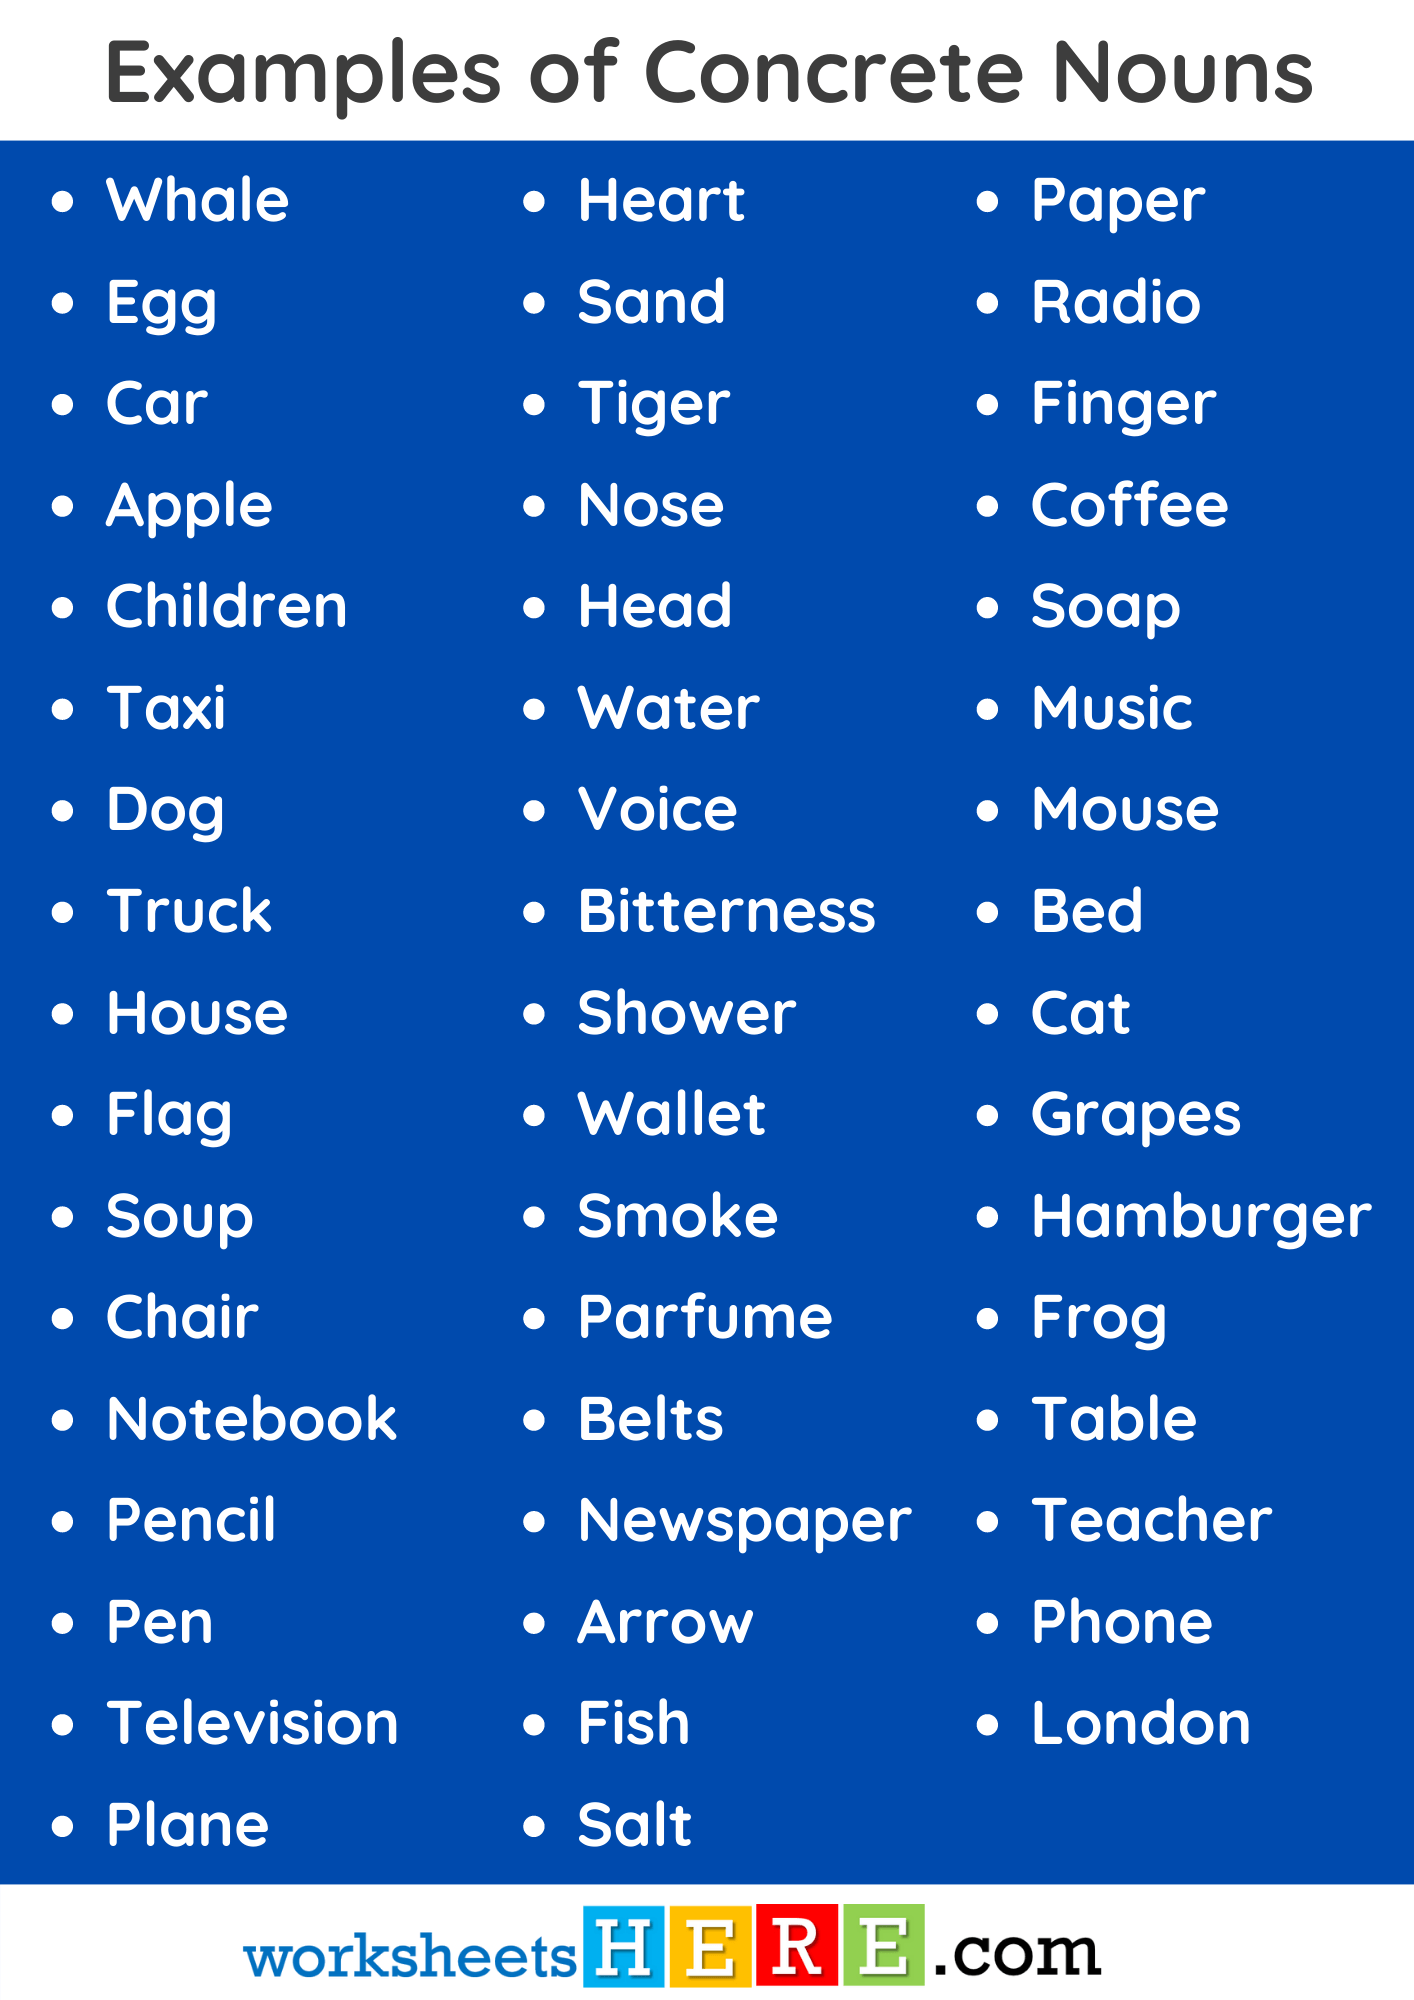 50 Examples of Concrete Nouns Words List PDF Worksheet For Students